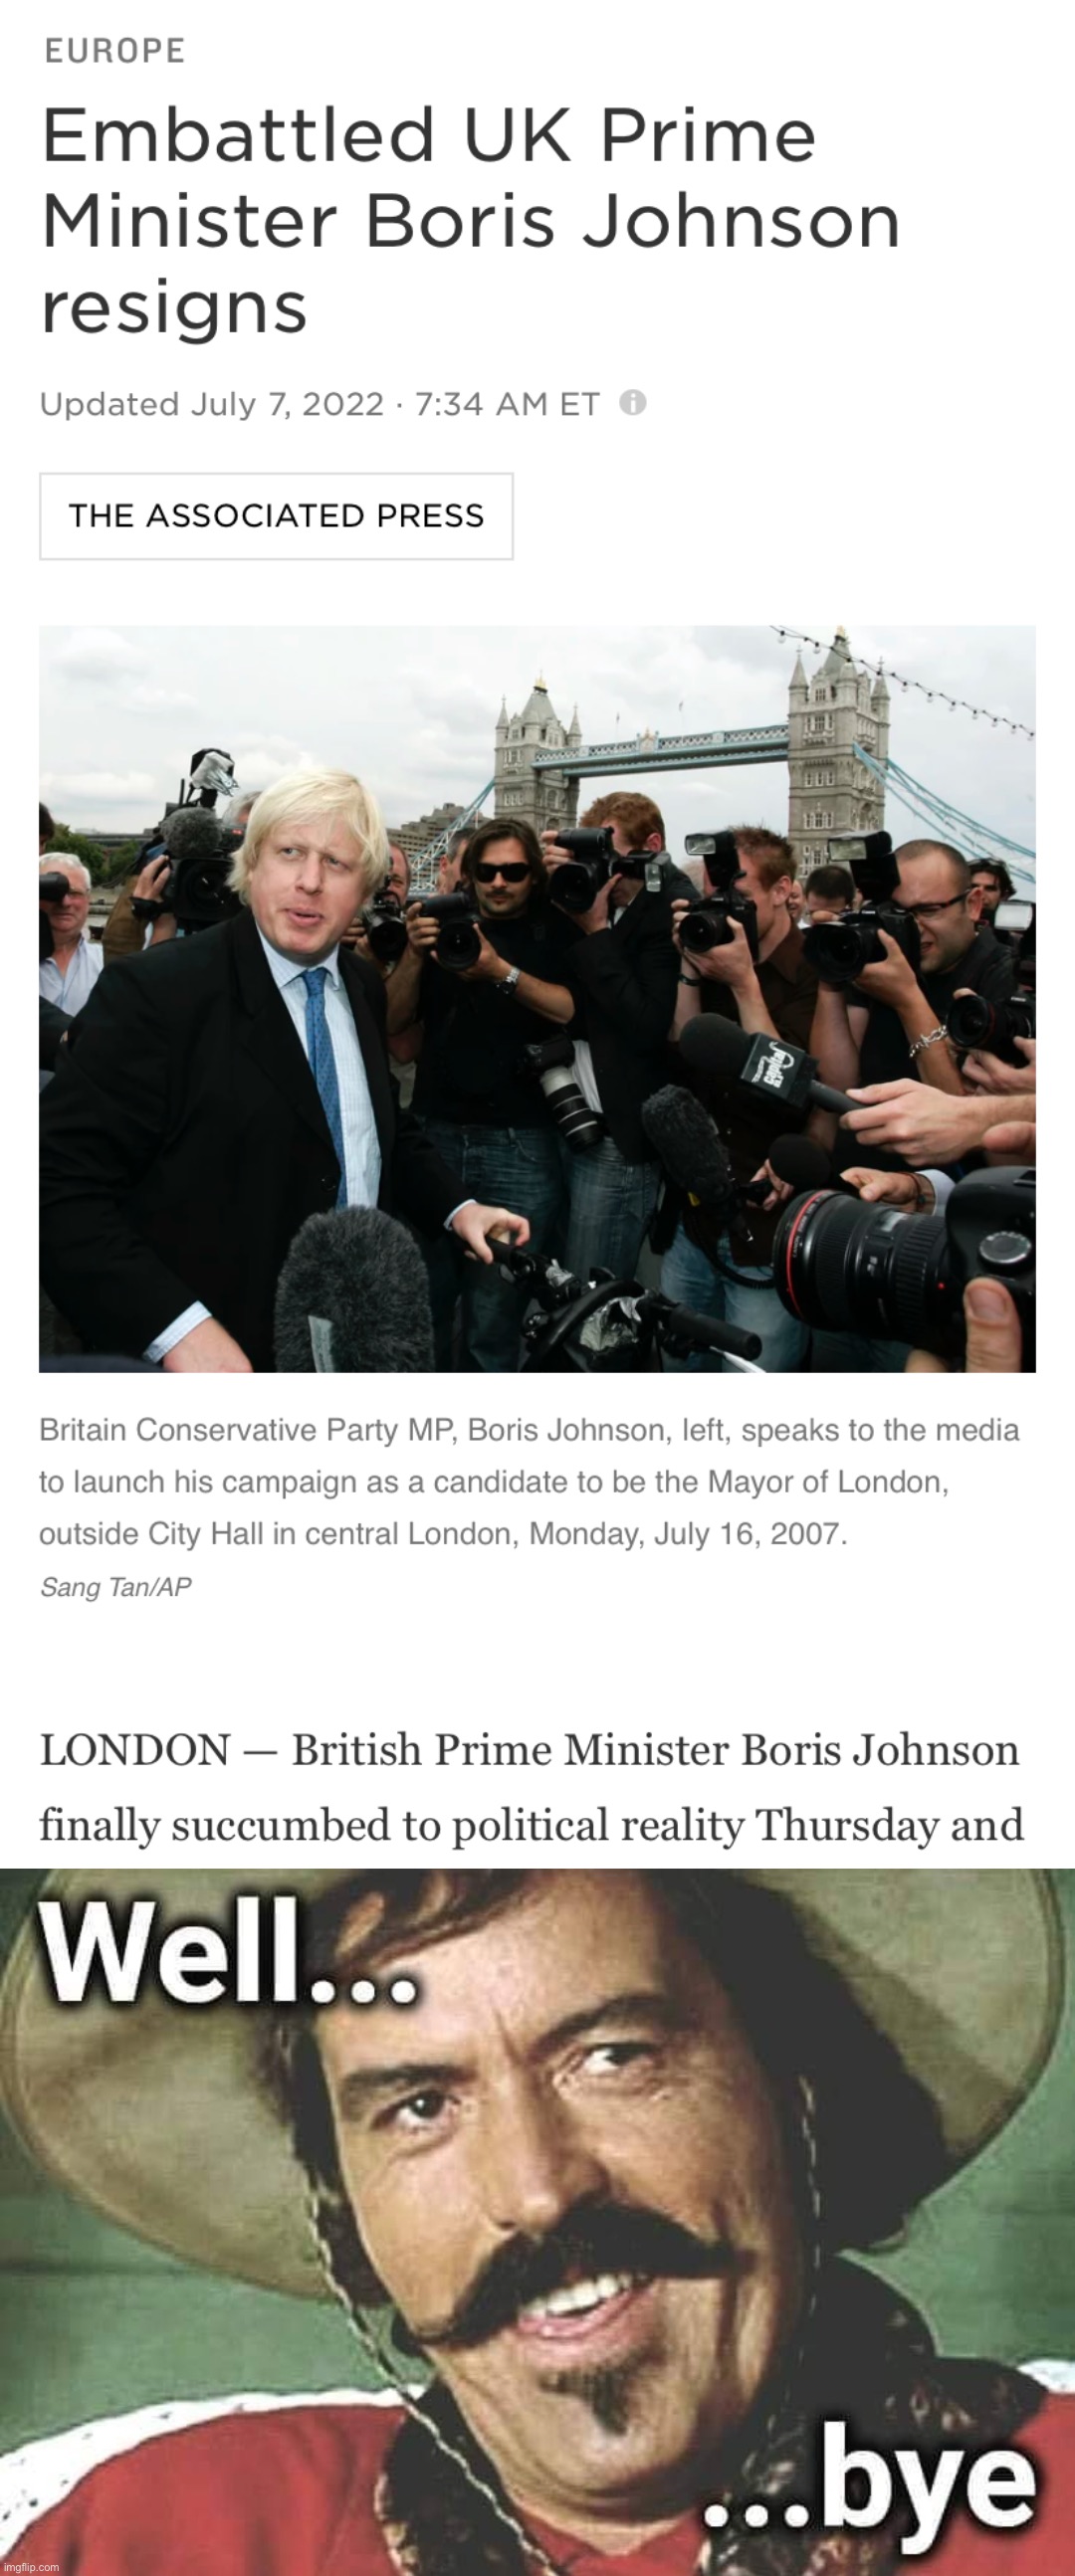 It is pleasant, when the winds are high, to watch from the shores the struggles of another. Anglophobia, but also, Anglophilia | image tagged in boris johnson resigns,tombstone curly bill well bye unfollow,anglophobia,anglophilia,boris johnson,boy bye | made w/ Imgflip meme maker